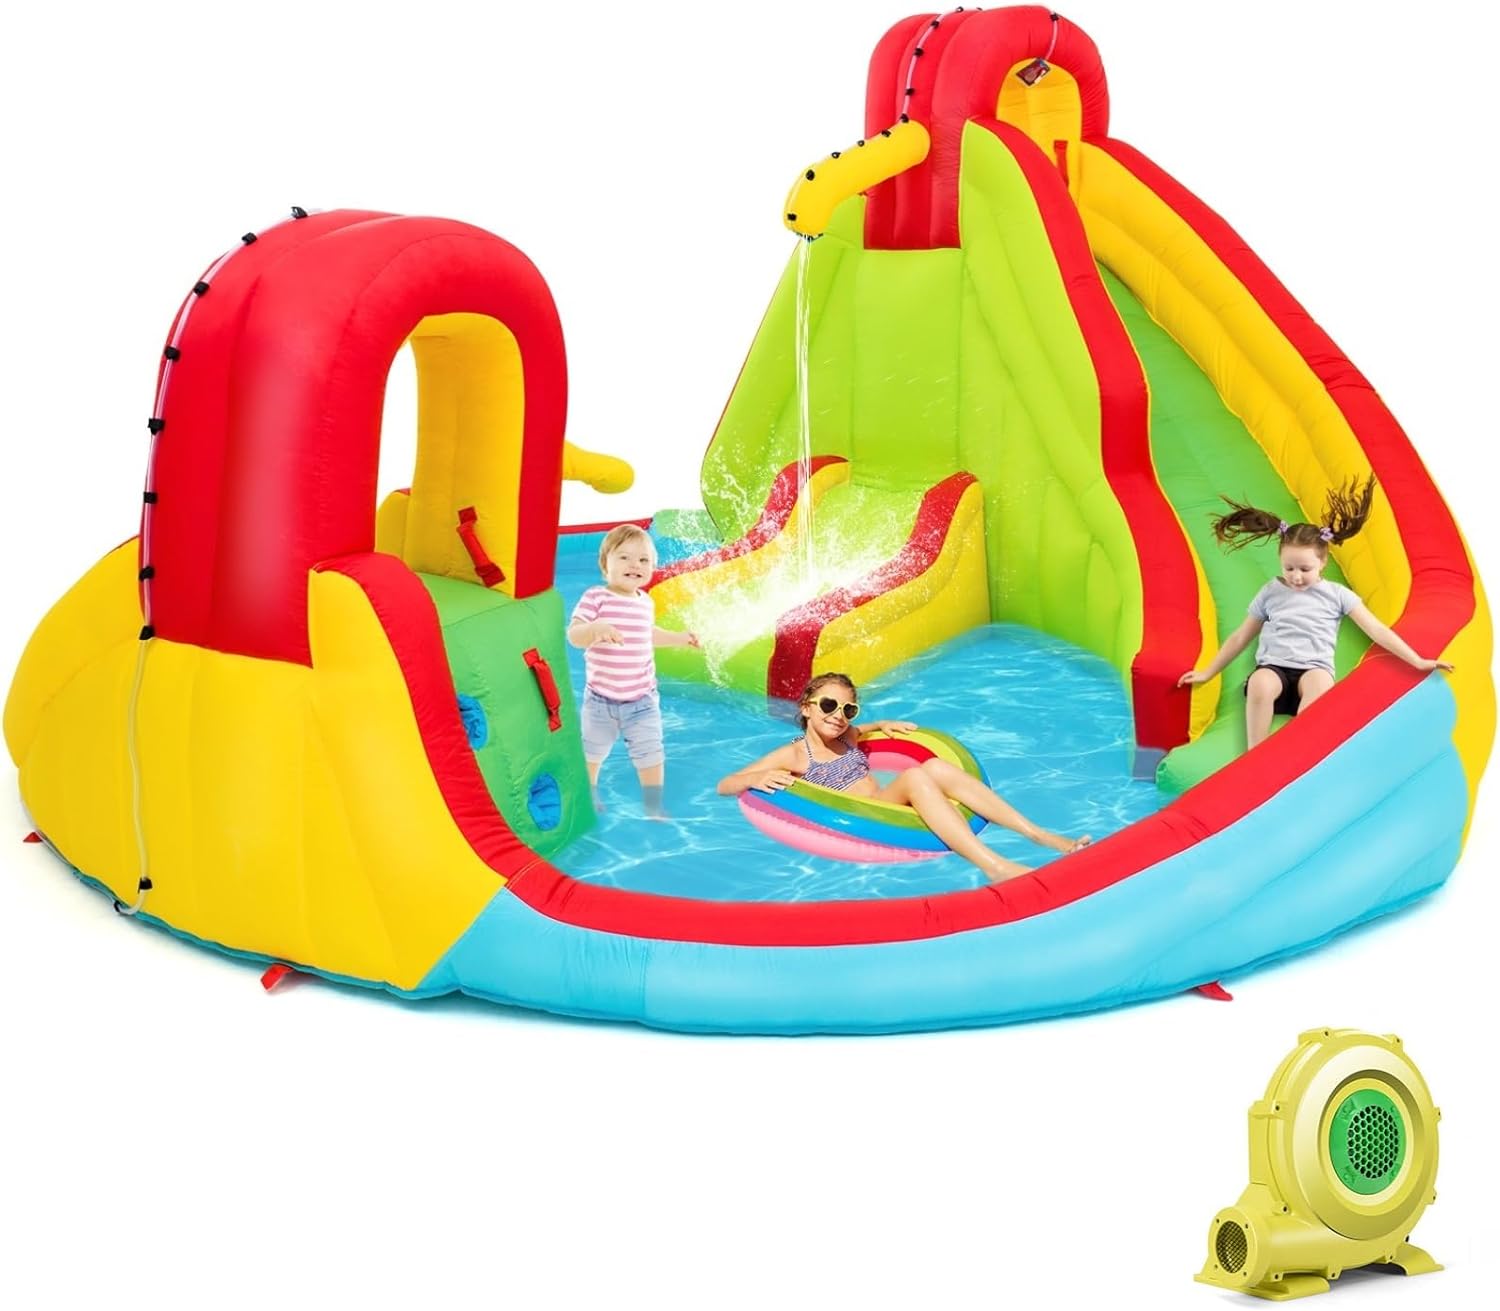 Costzon Inflatable Water Slide, Mega Waterslide Park for Kids Outdoor Party Fun with Dual Slides & Climbing Walls, Large Pool, 480W Blower, Water Slides Inflatables for Kids and Adults Backyard Gifts